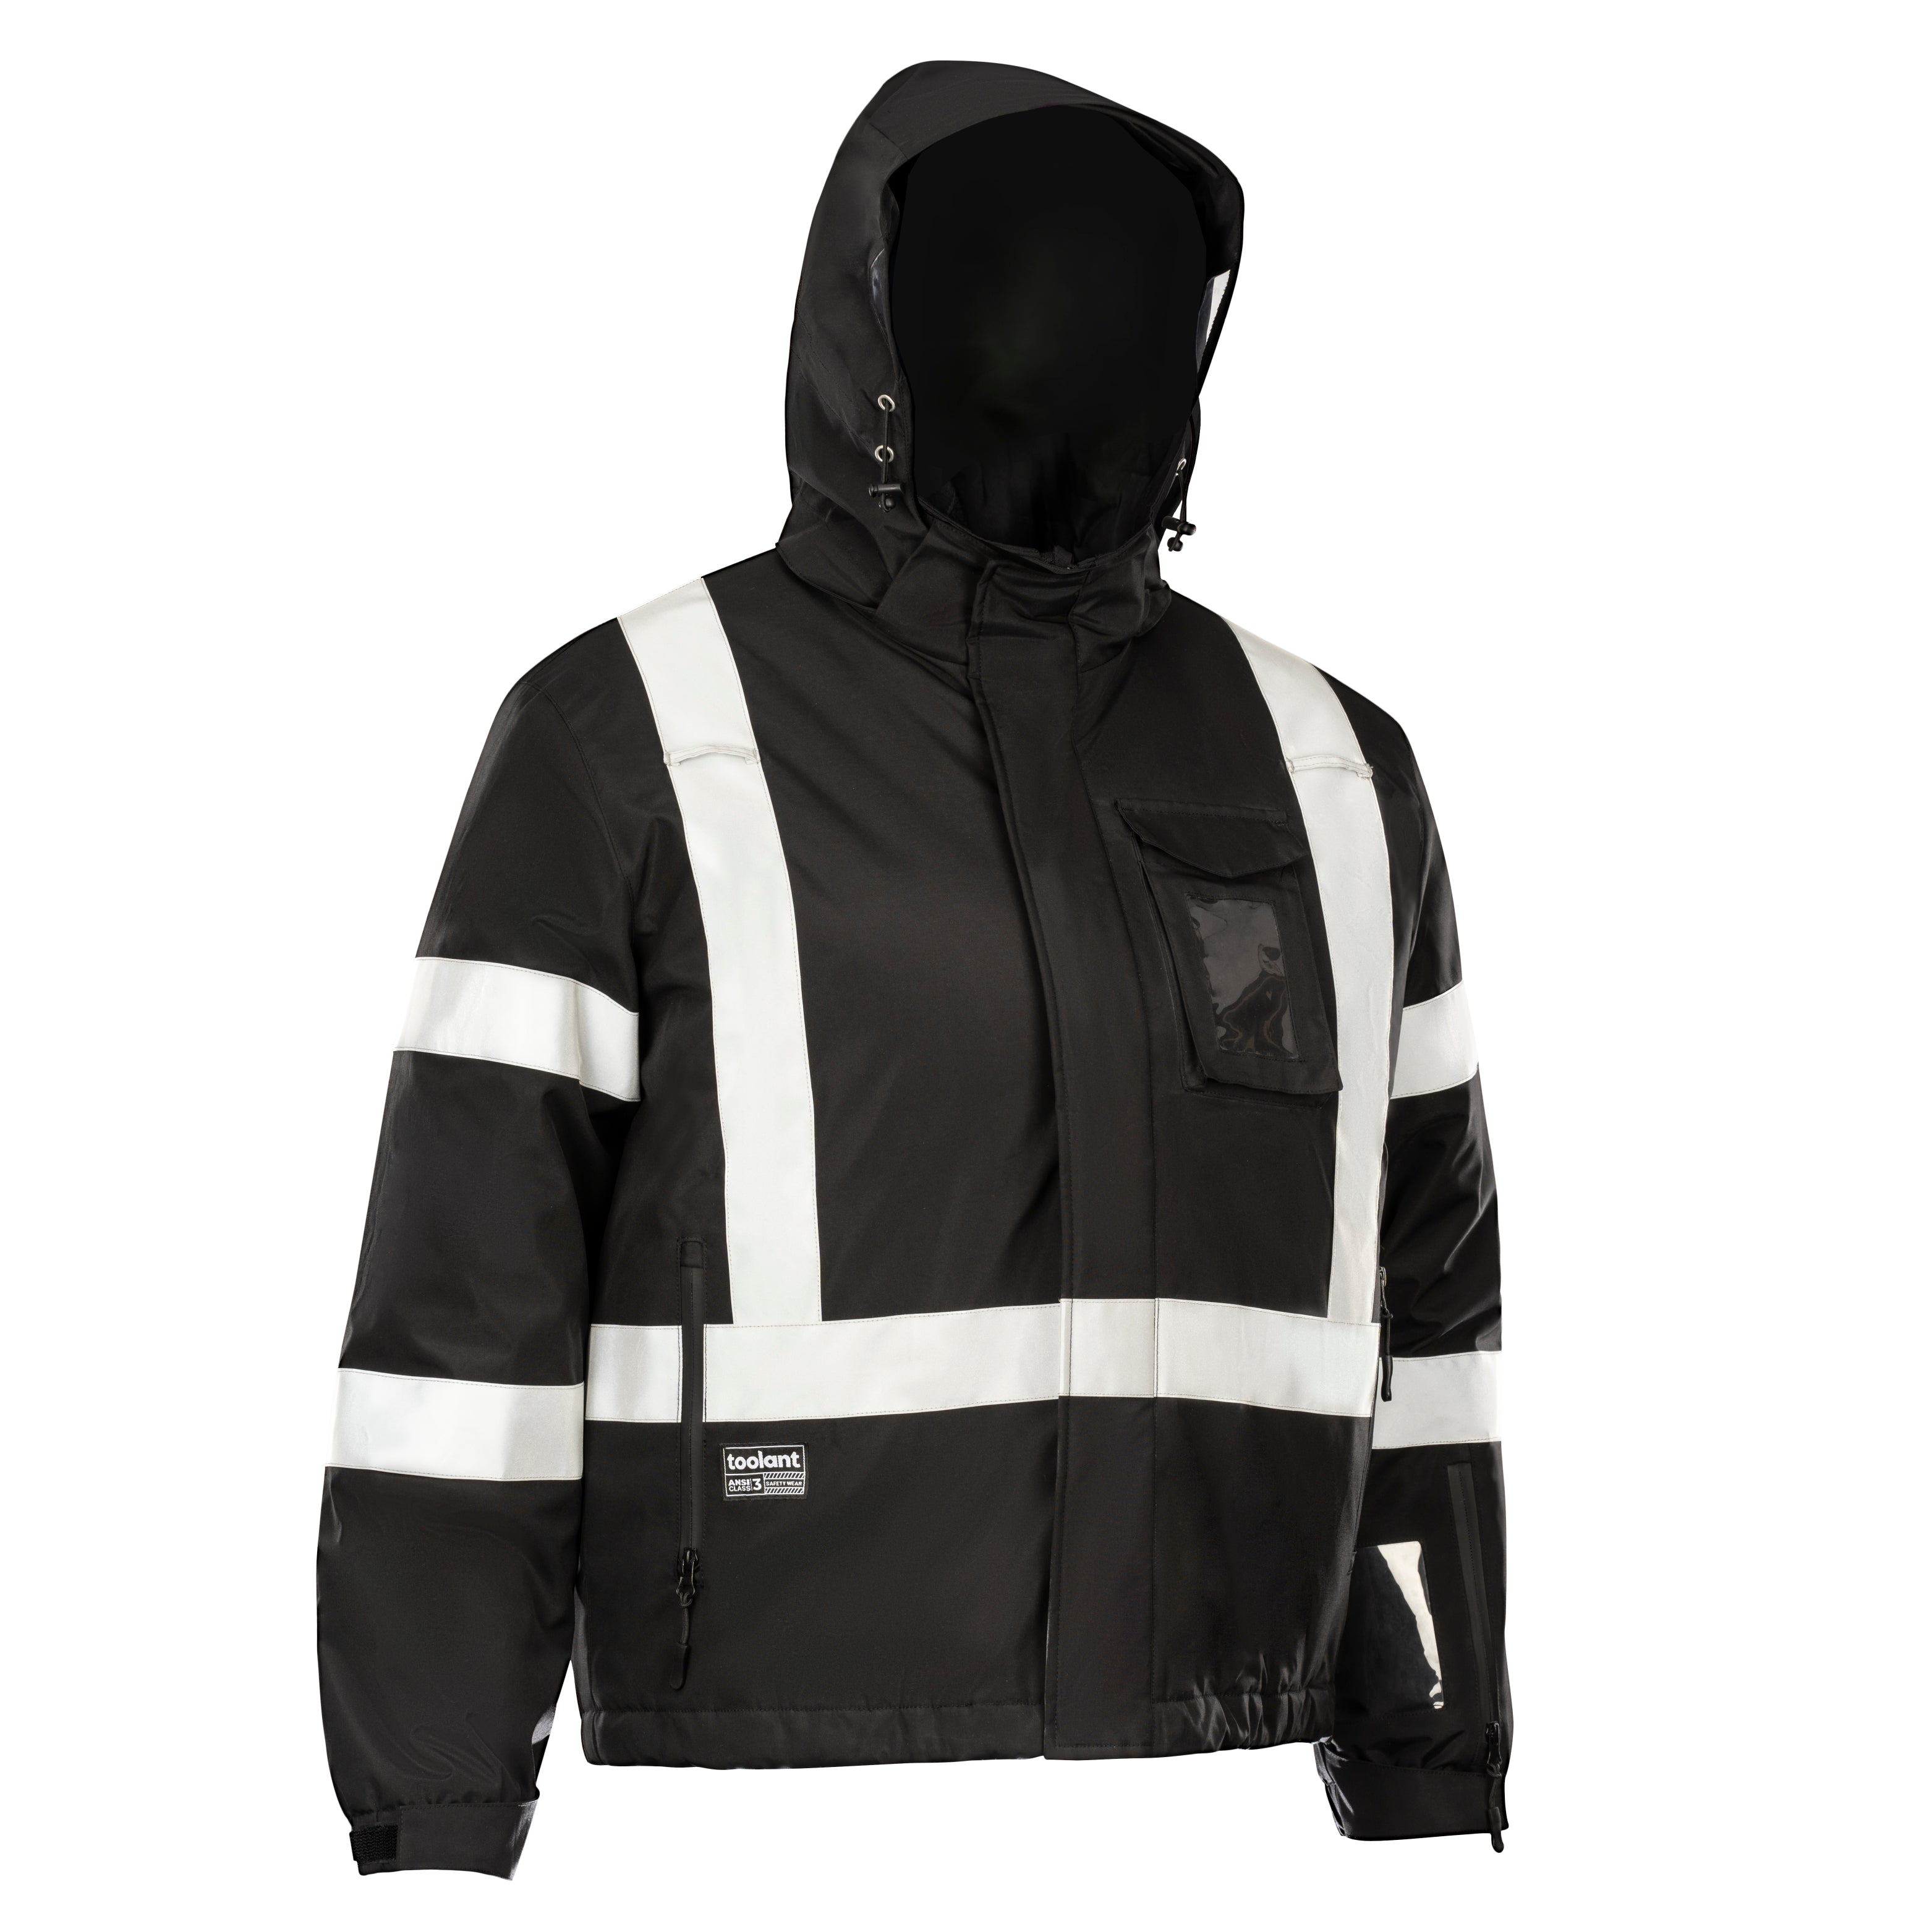 toolant High-Visibility, Reflective, Waterproof, Insulated Safety Jacket